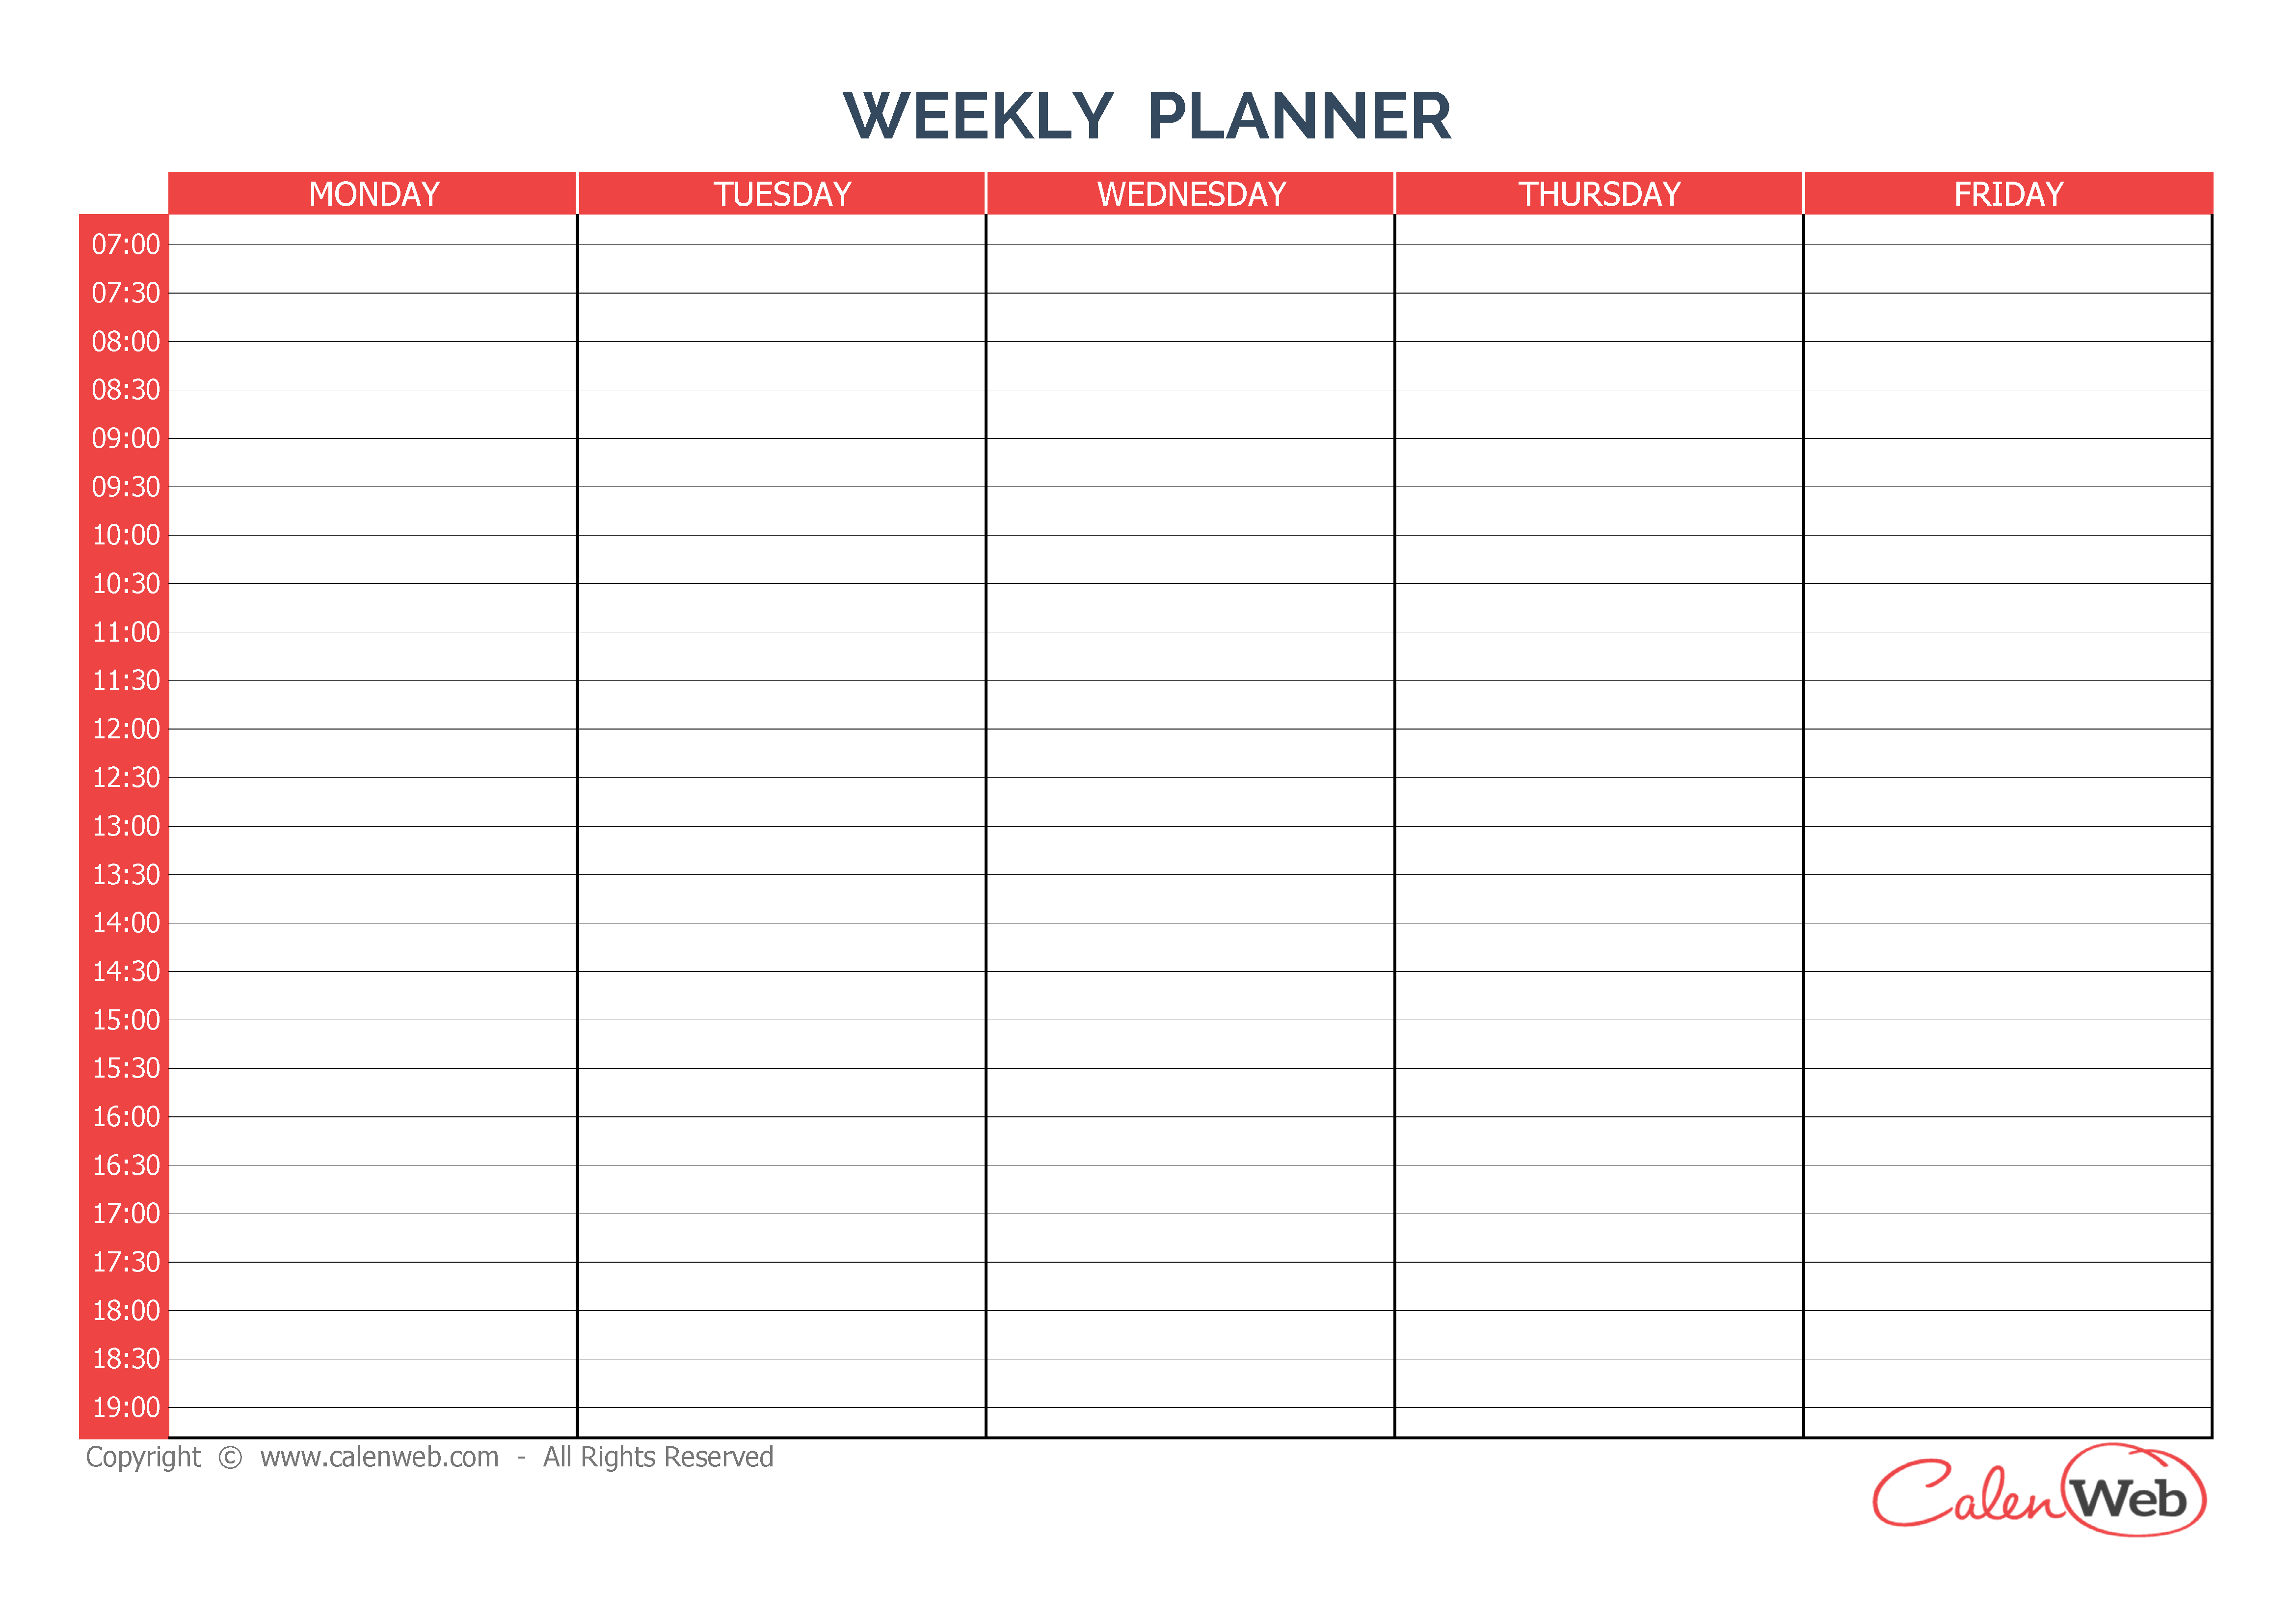 weekly-planner-5-days-a-week-of-5-days-calenweb